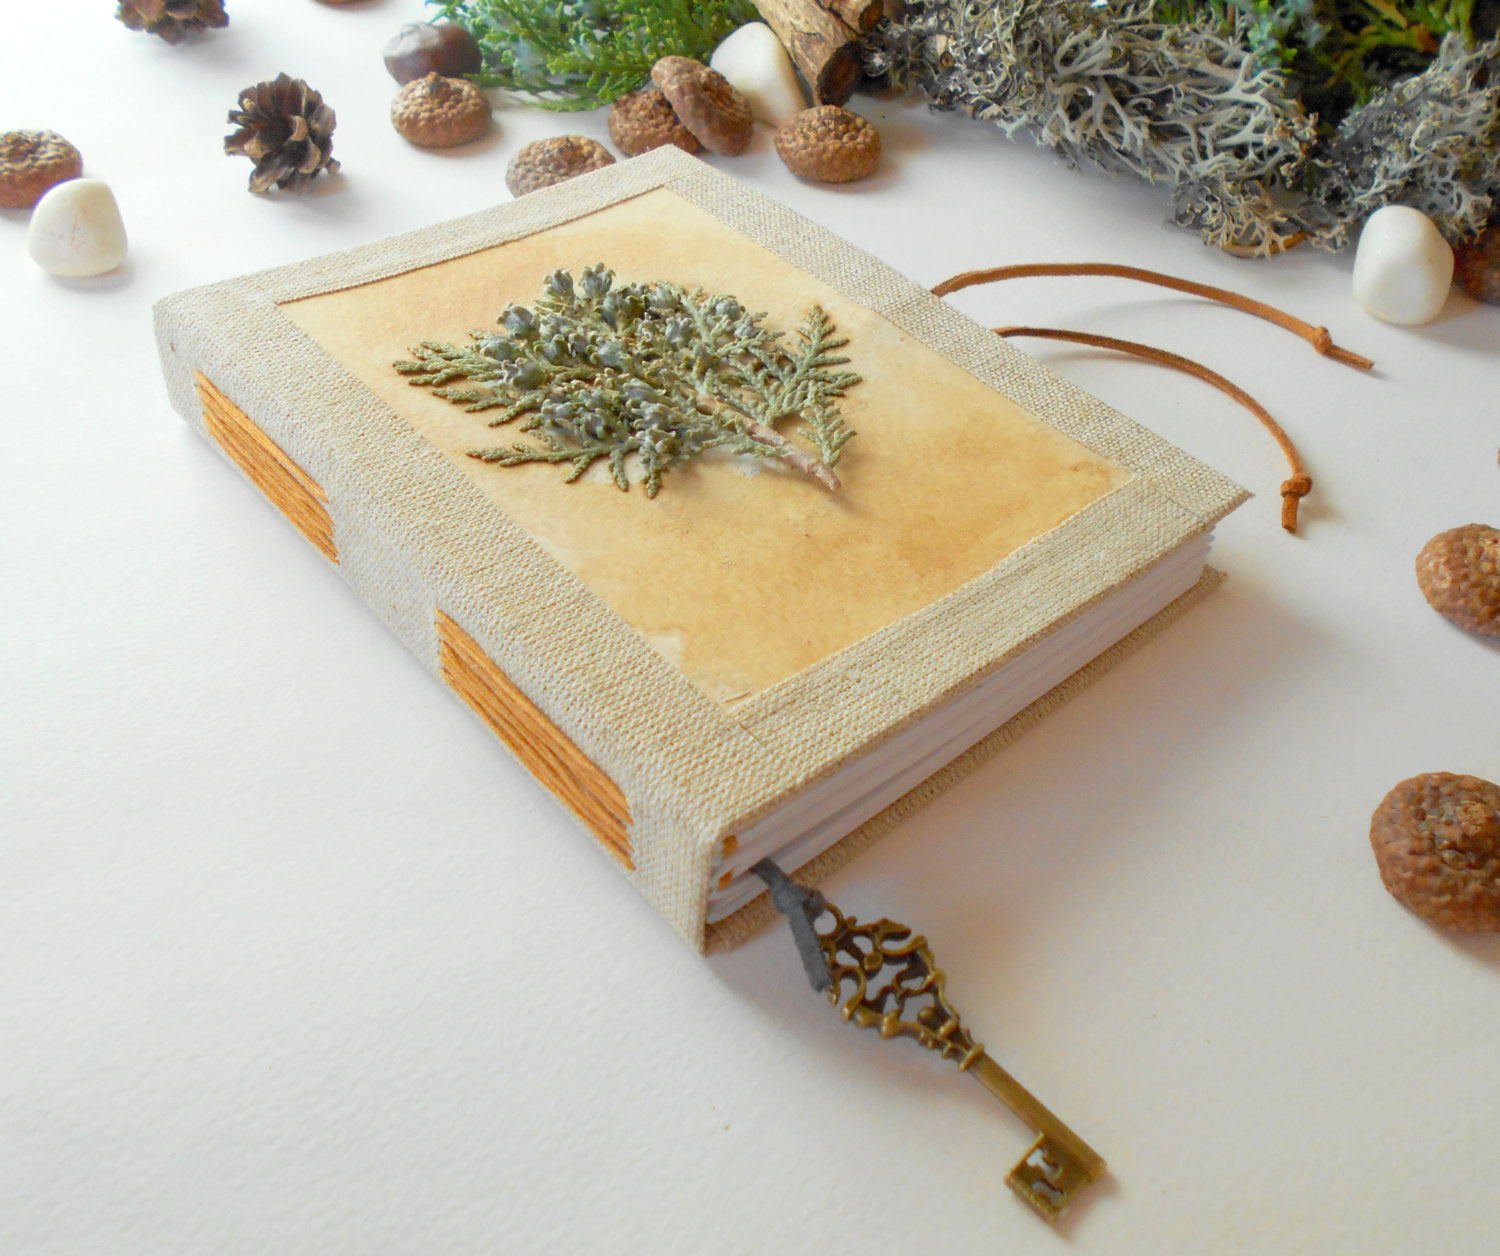 Burlap journal coptic bound with herbalised Thuya branch - custom journal- hardcovers and 100% recycled pages- Eco-friendly gift for writers, for artists and for teachers